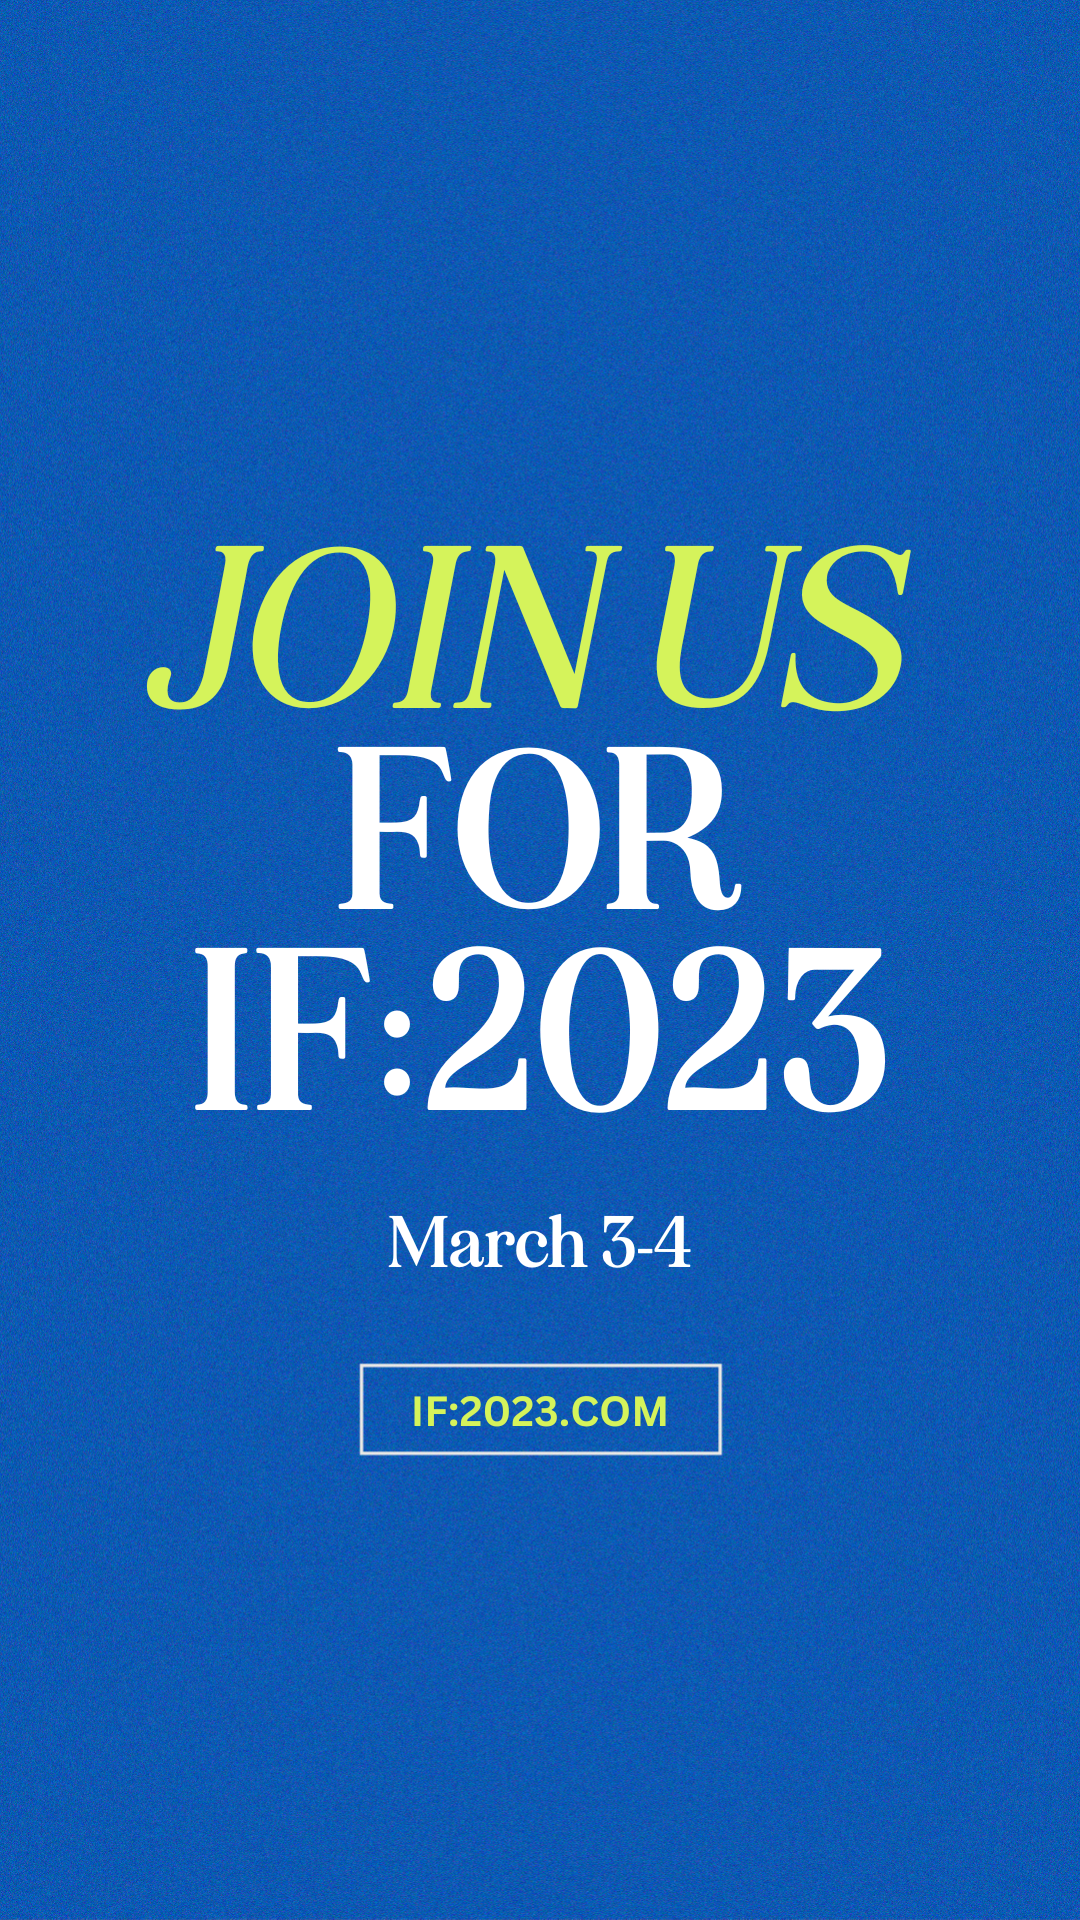 Join us for IF:2023 on March 3rd and 4th